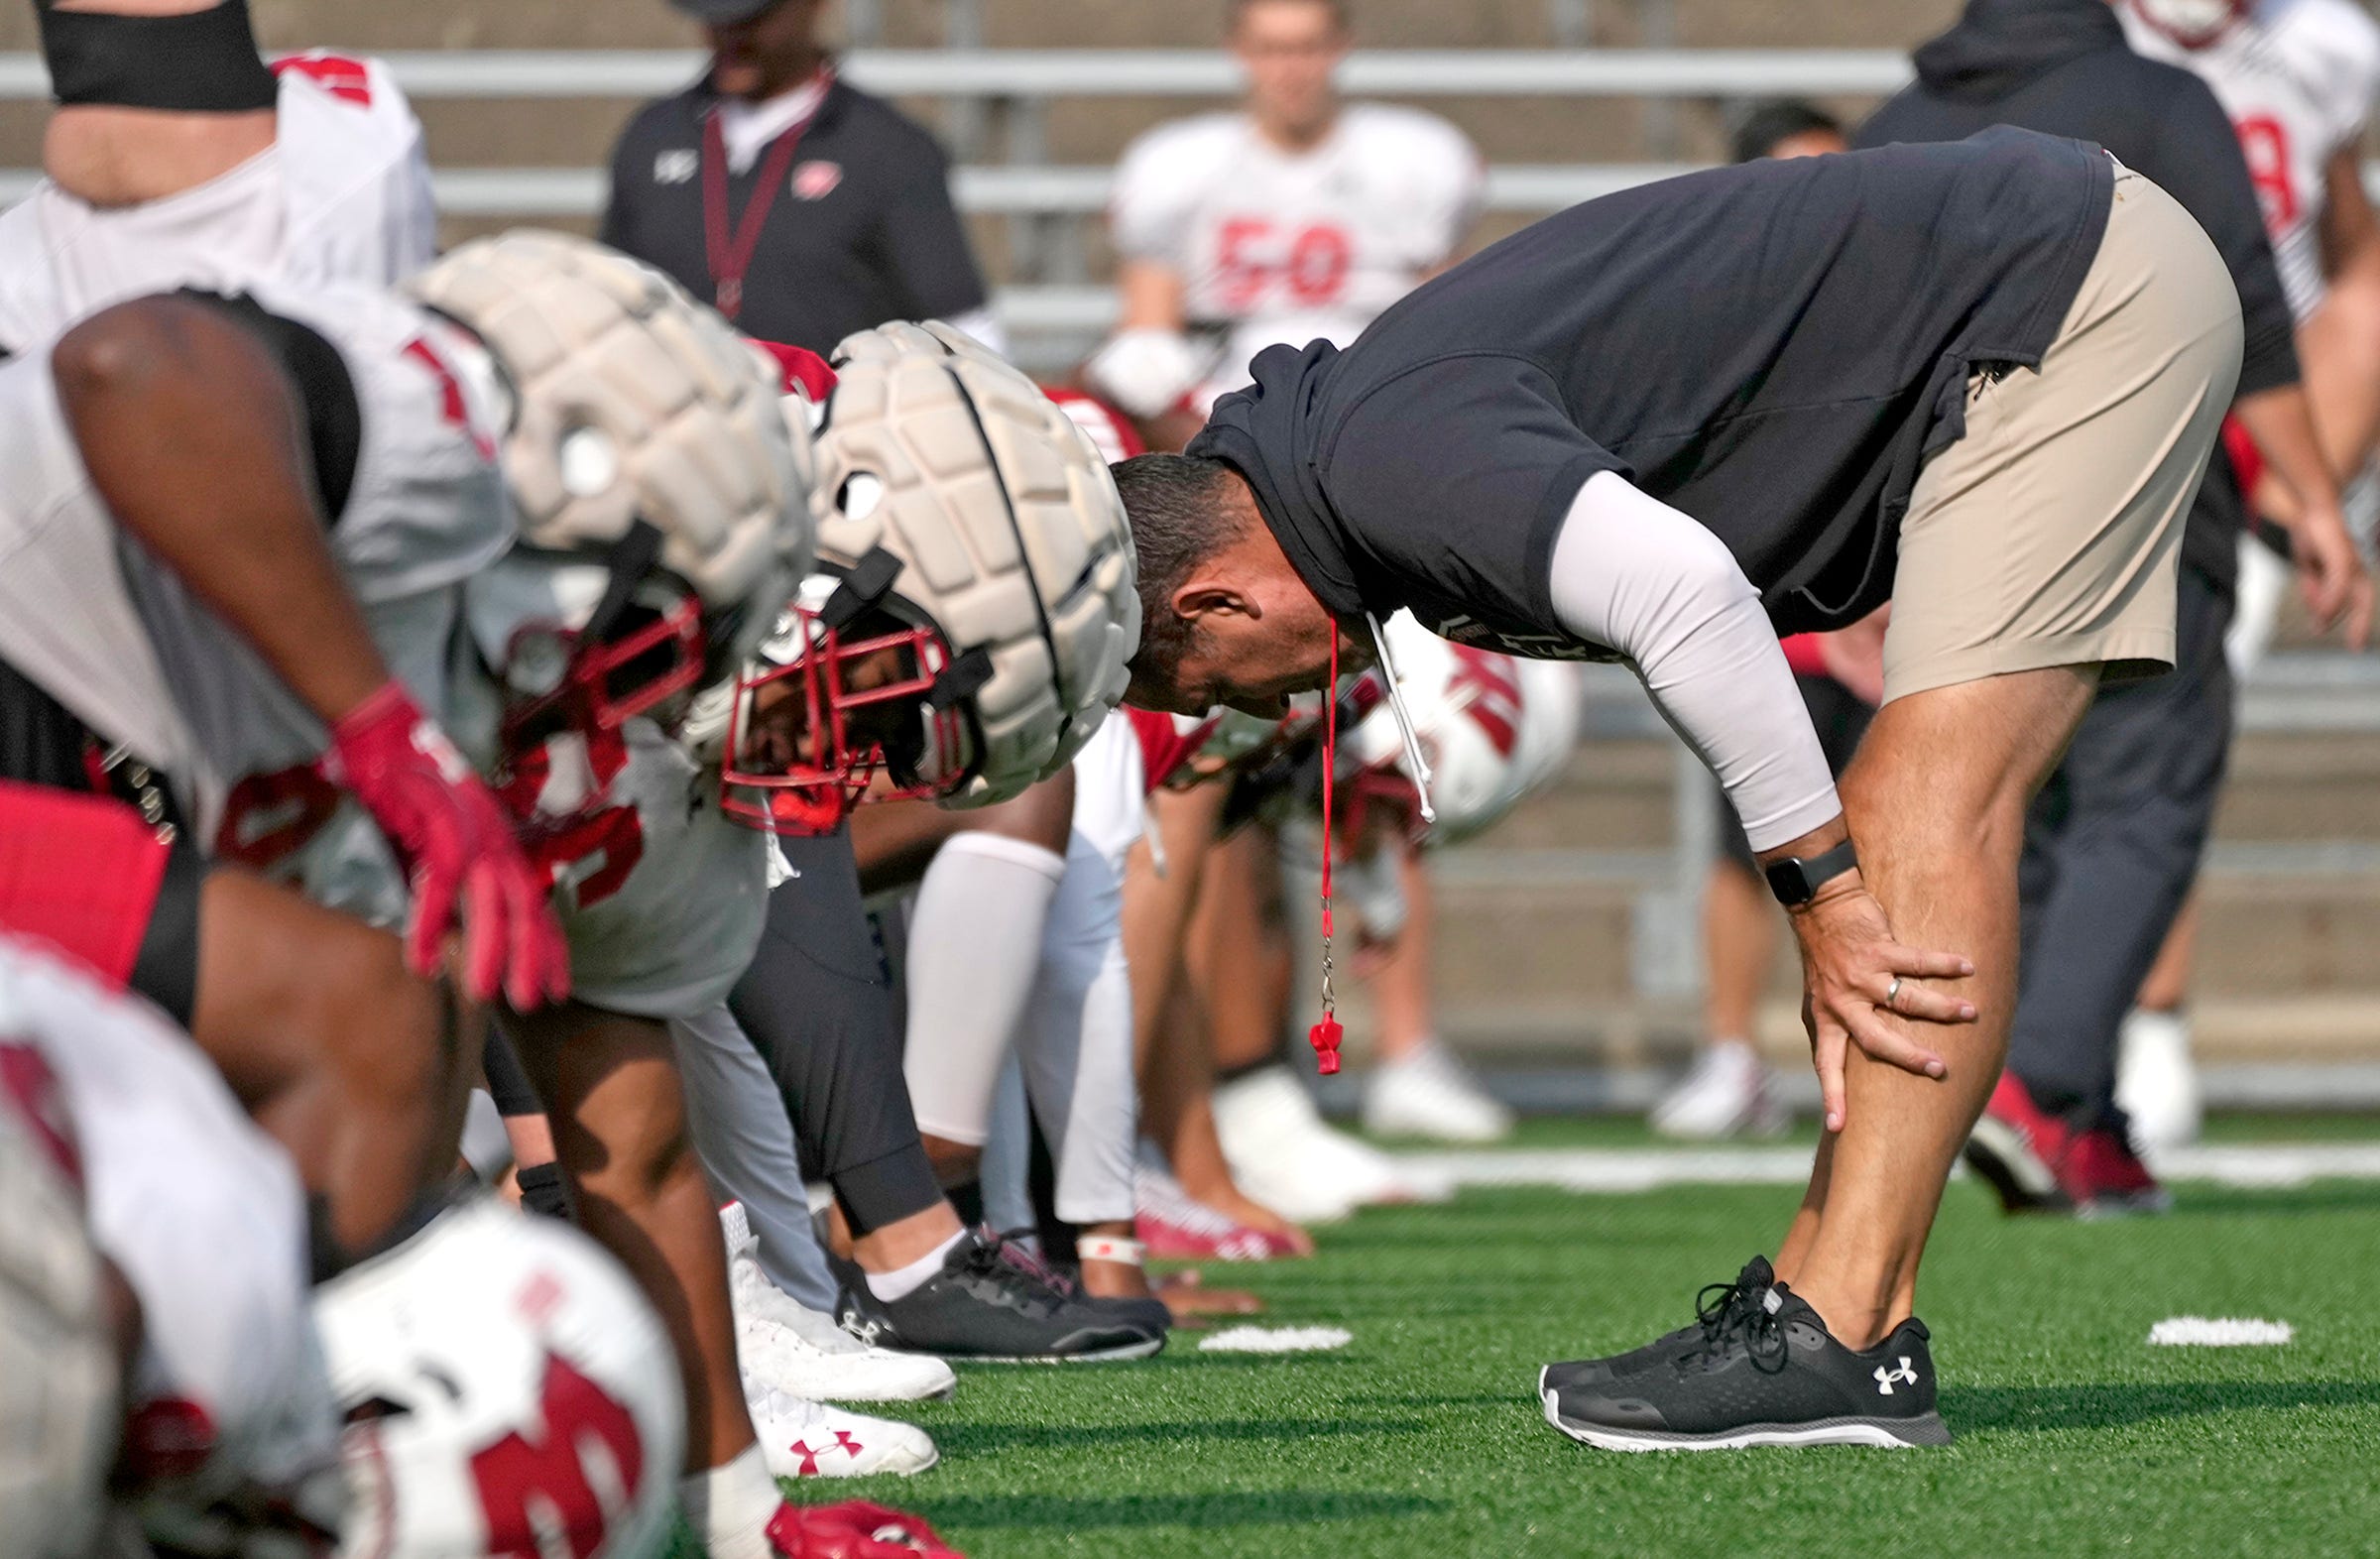 Wisconsin Badgers Football players stretching during fall camp